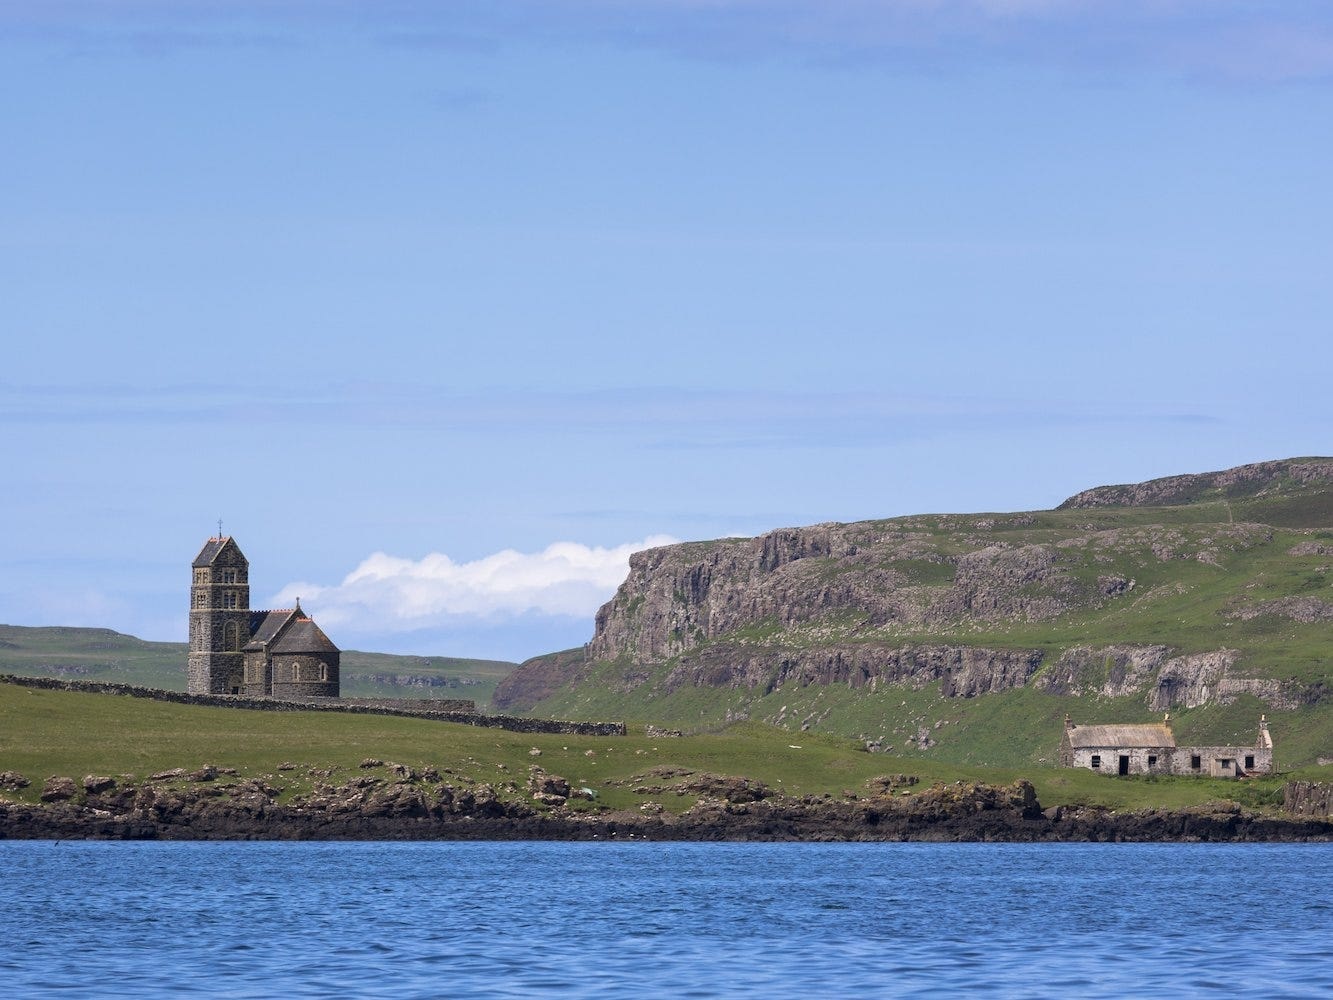 The Isle of Canna has 15 residents.Tim Graham / Contributor